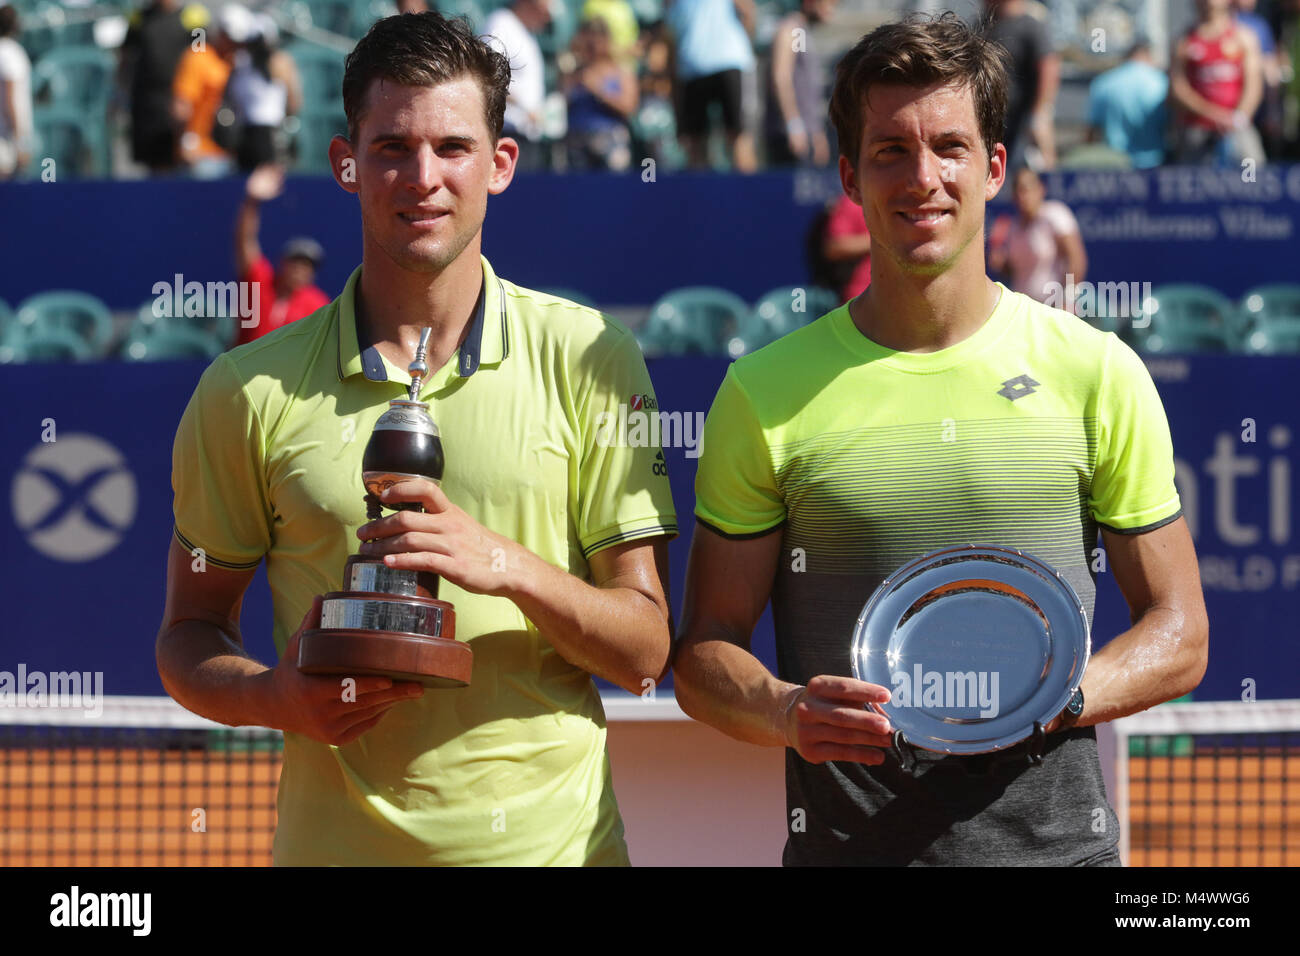 Buenos Aires, Argentina. 18th Feb, 2018. Dominic Thiem wins his second title of Buenos Aires ATP 250 this sunday on central court of Buenos Aires Lawn Tennis, Argentina. (Photo: Néstor J. Beremblum / Alamy News) Credit: Néstor J. Beremblum/Alamy Live News Stock Photo